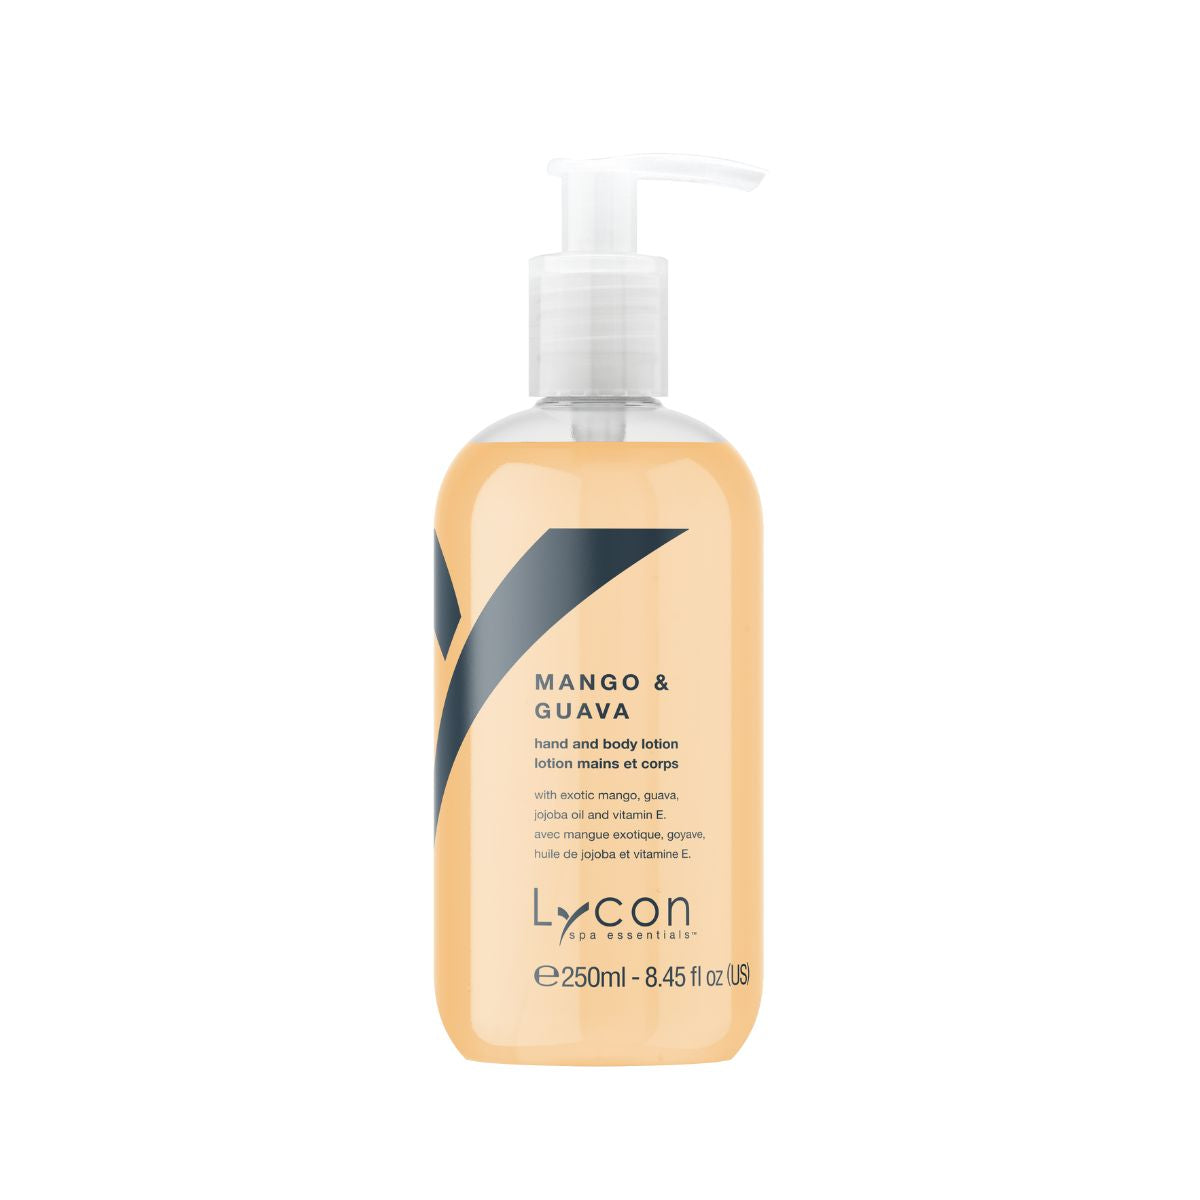 Mango & Guava Hand and Body Lotion 250ml - Retail